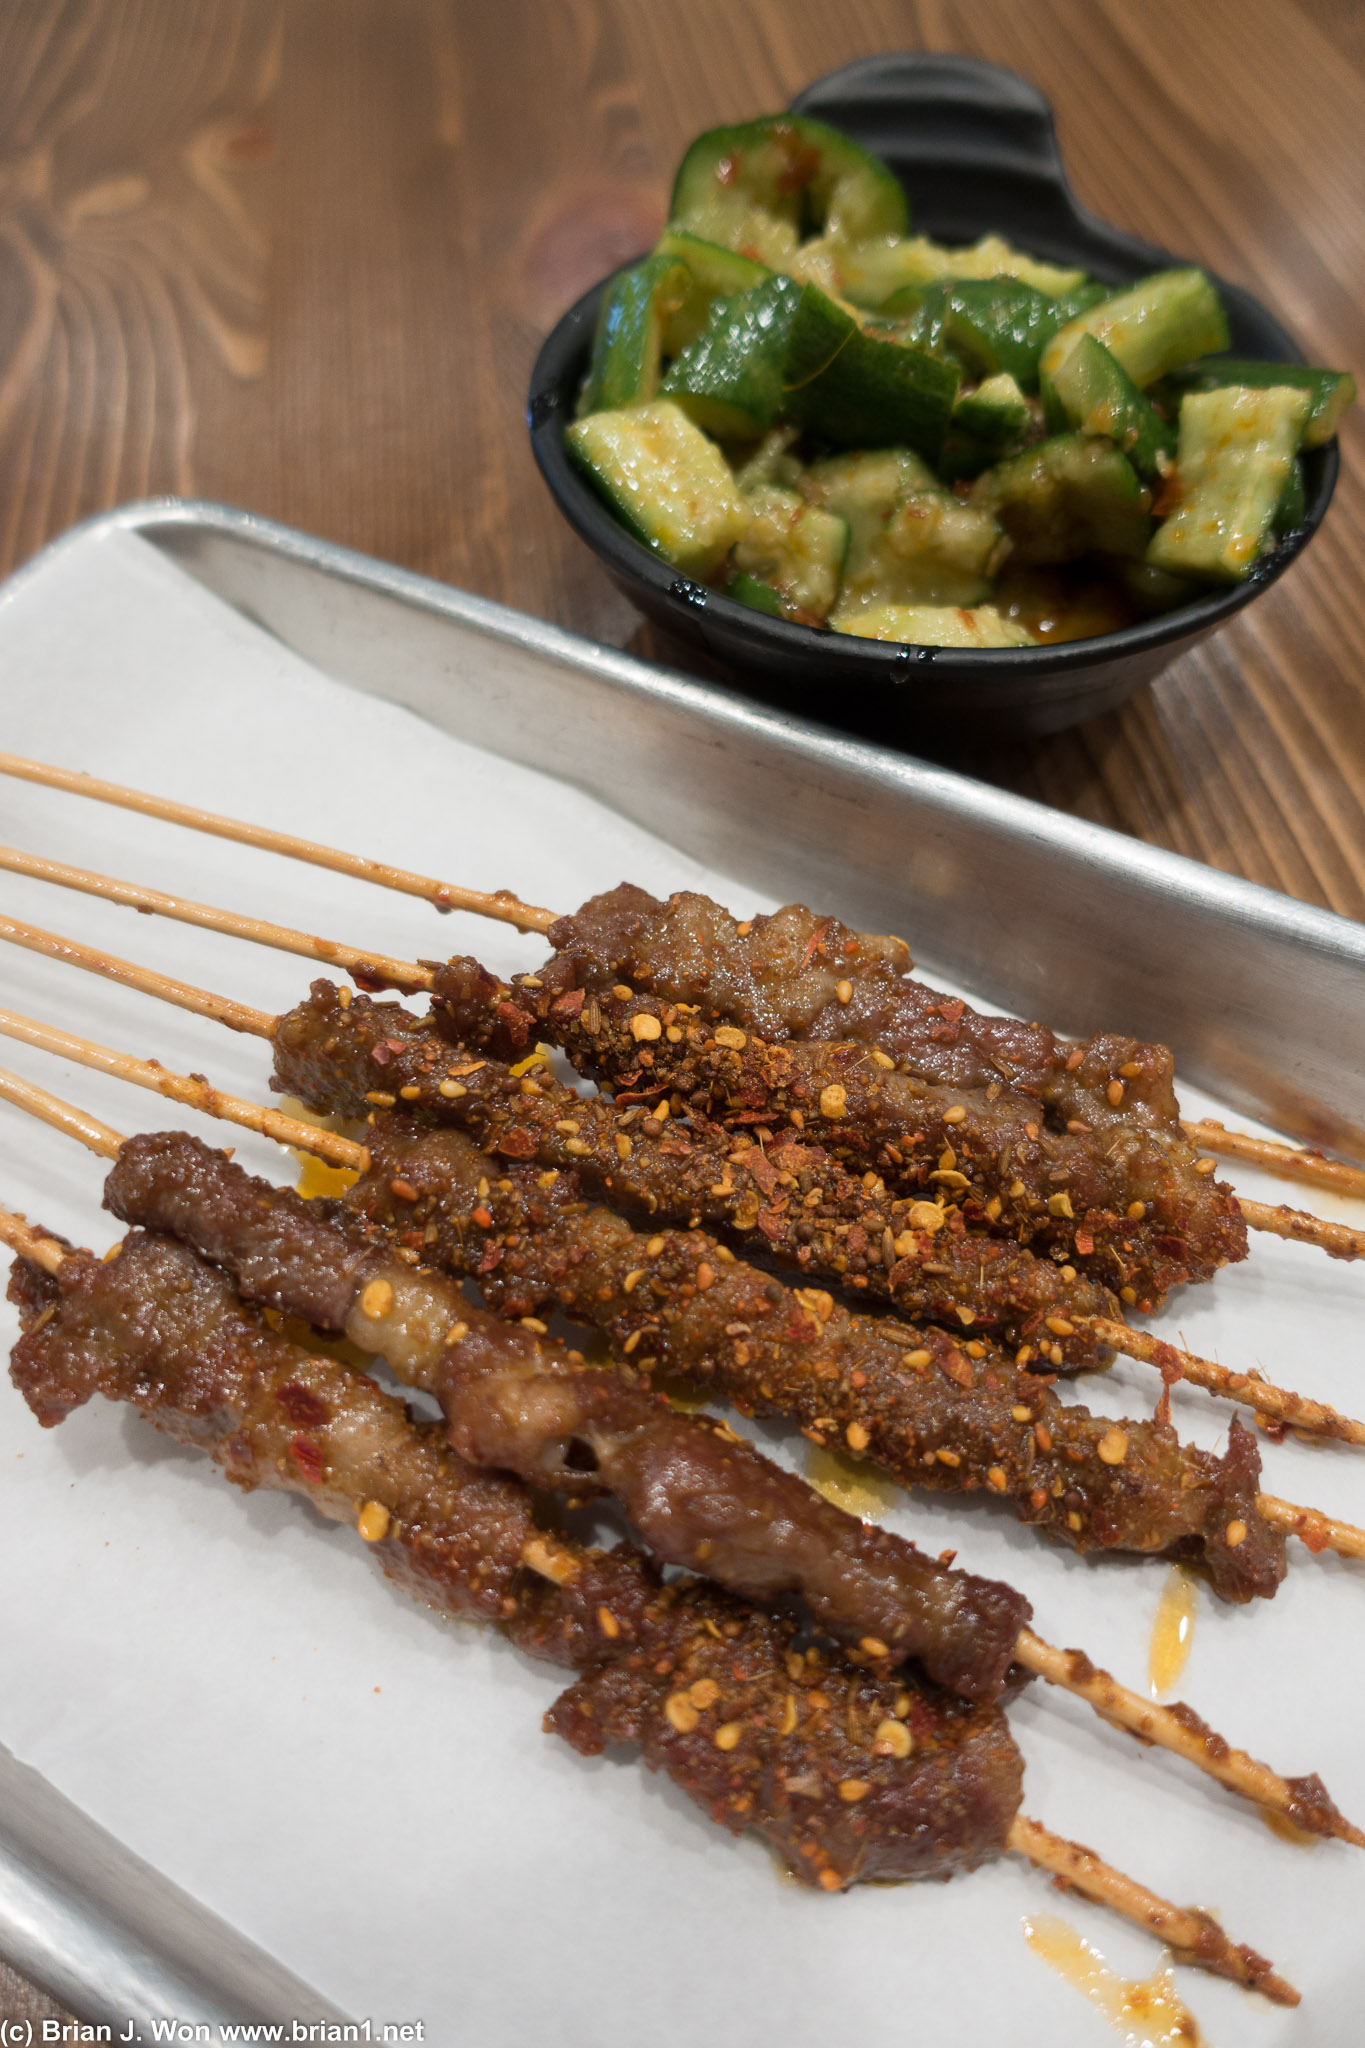 Lamb skewers are still just passable. Cold cucumber isn't bad, just like the other location.